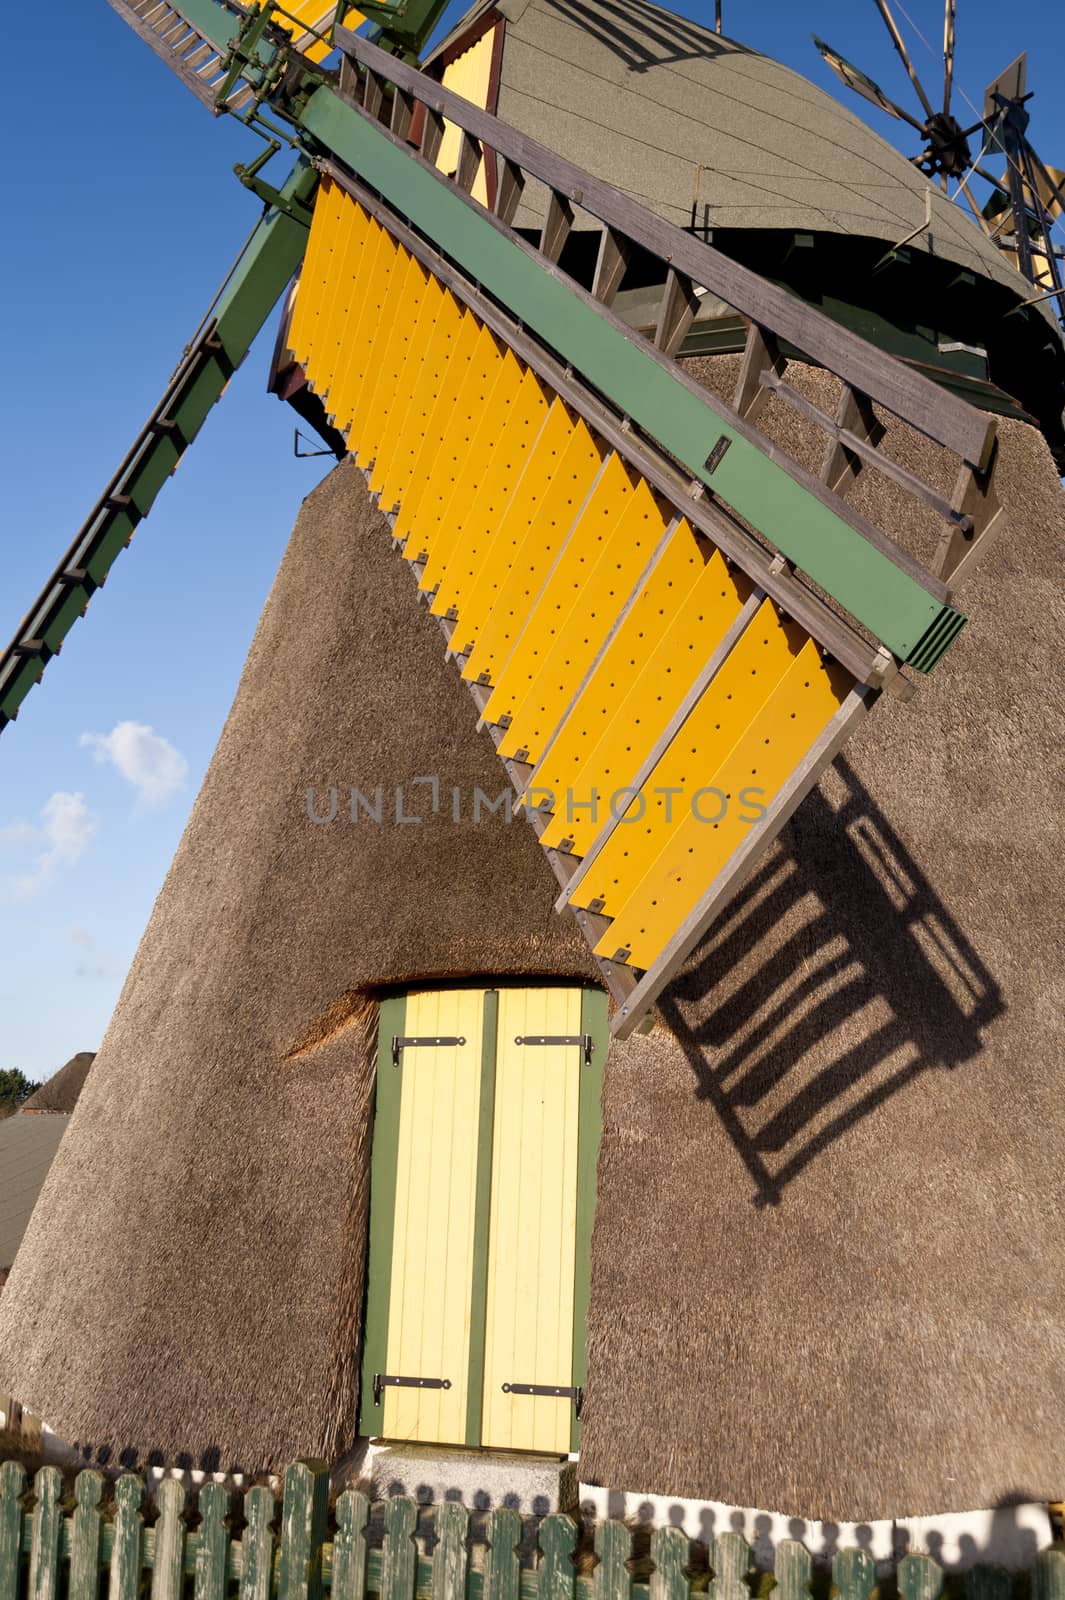 Windmill on Amrum in Germany by 3quarks